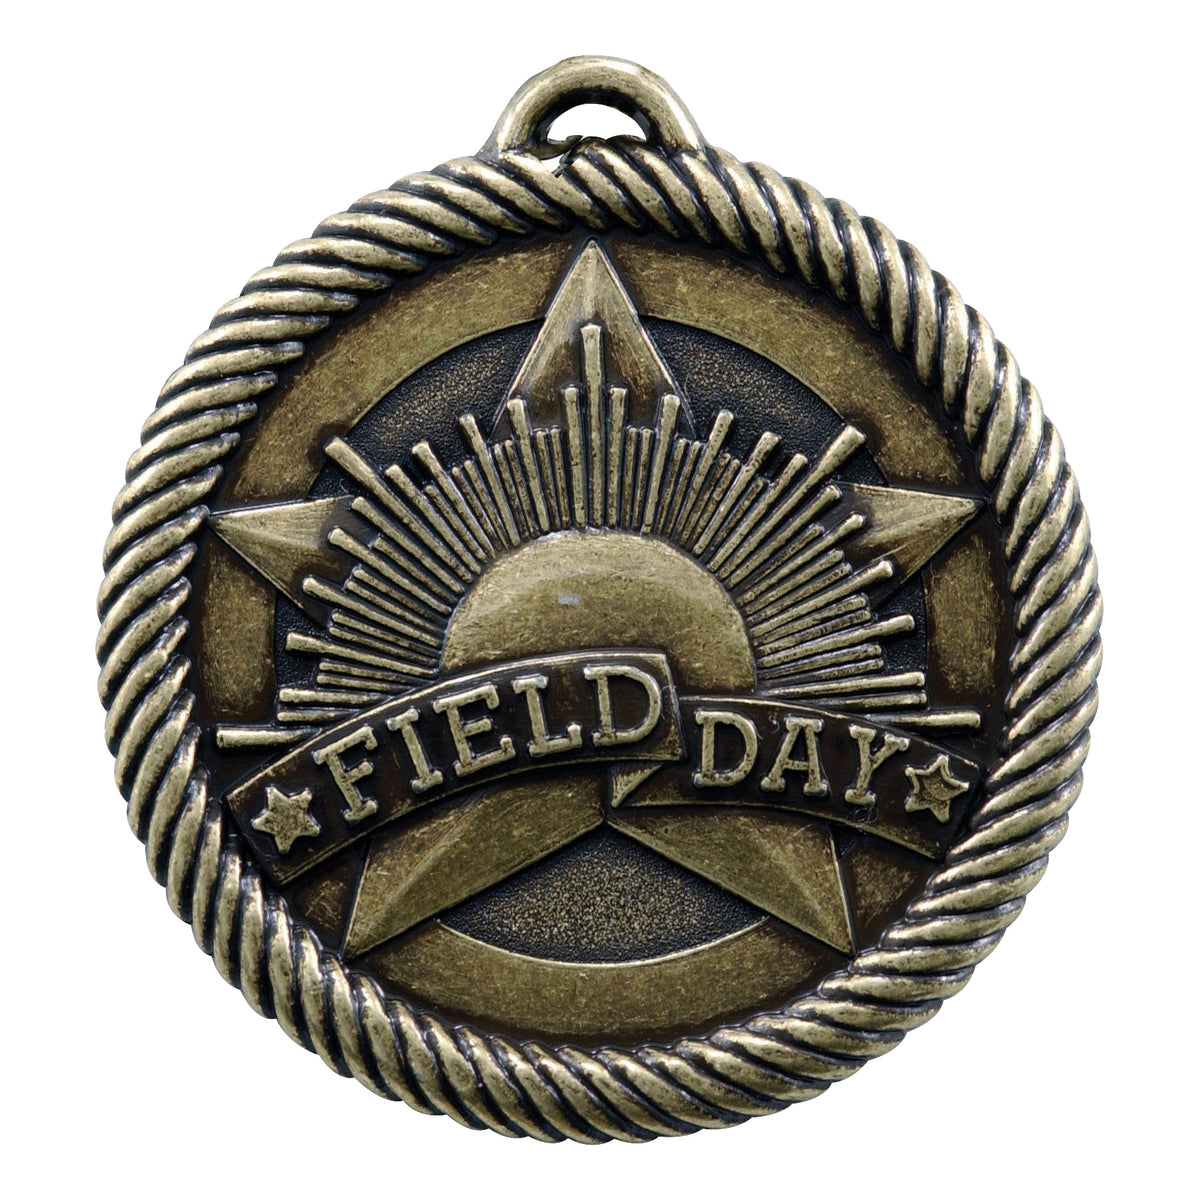 2" Field Day Medal